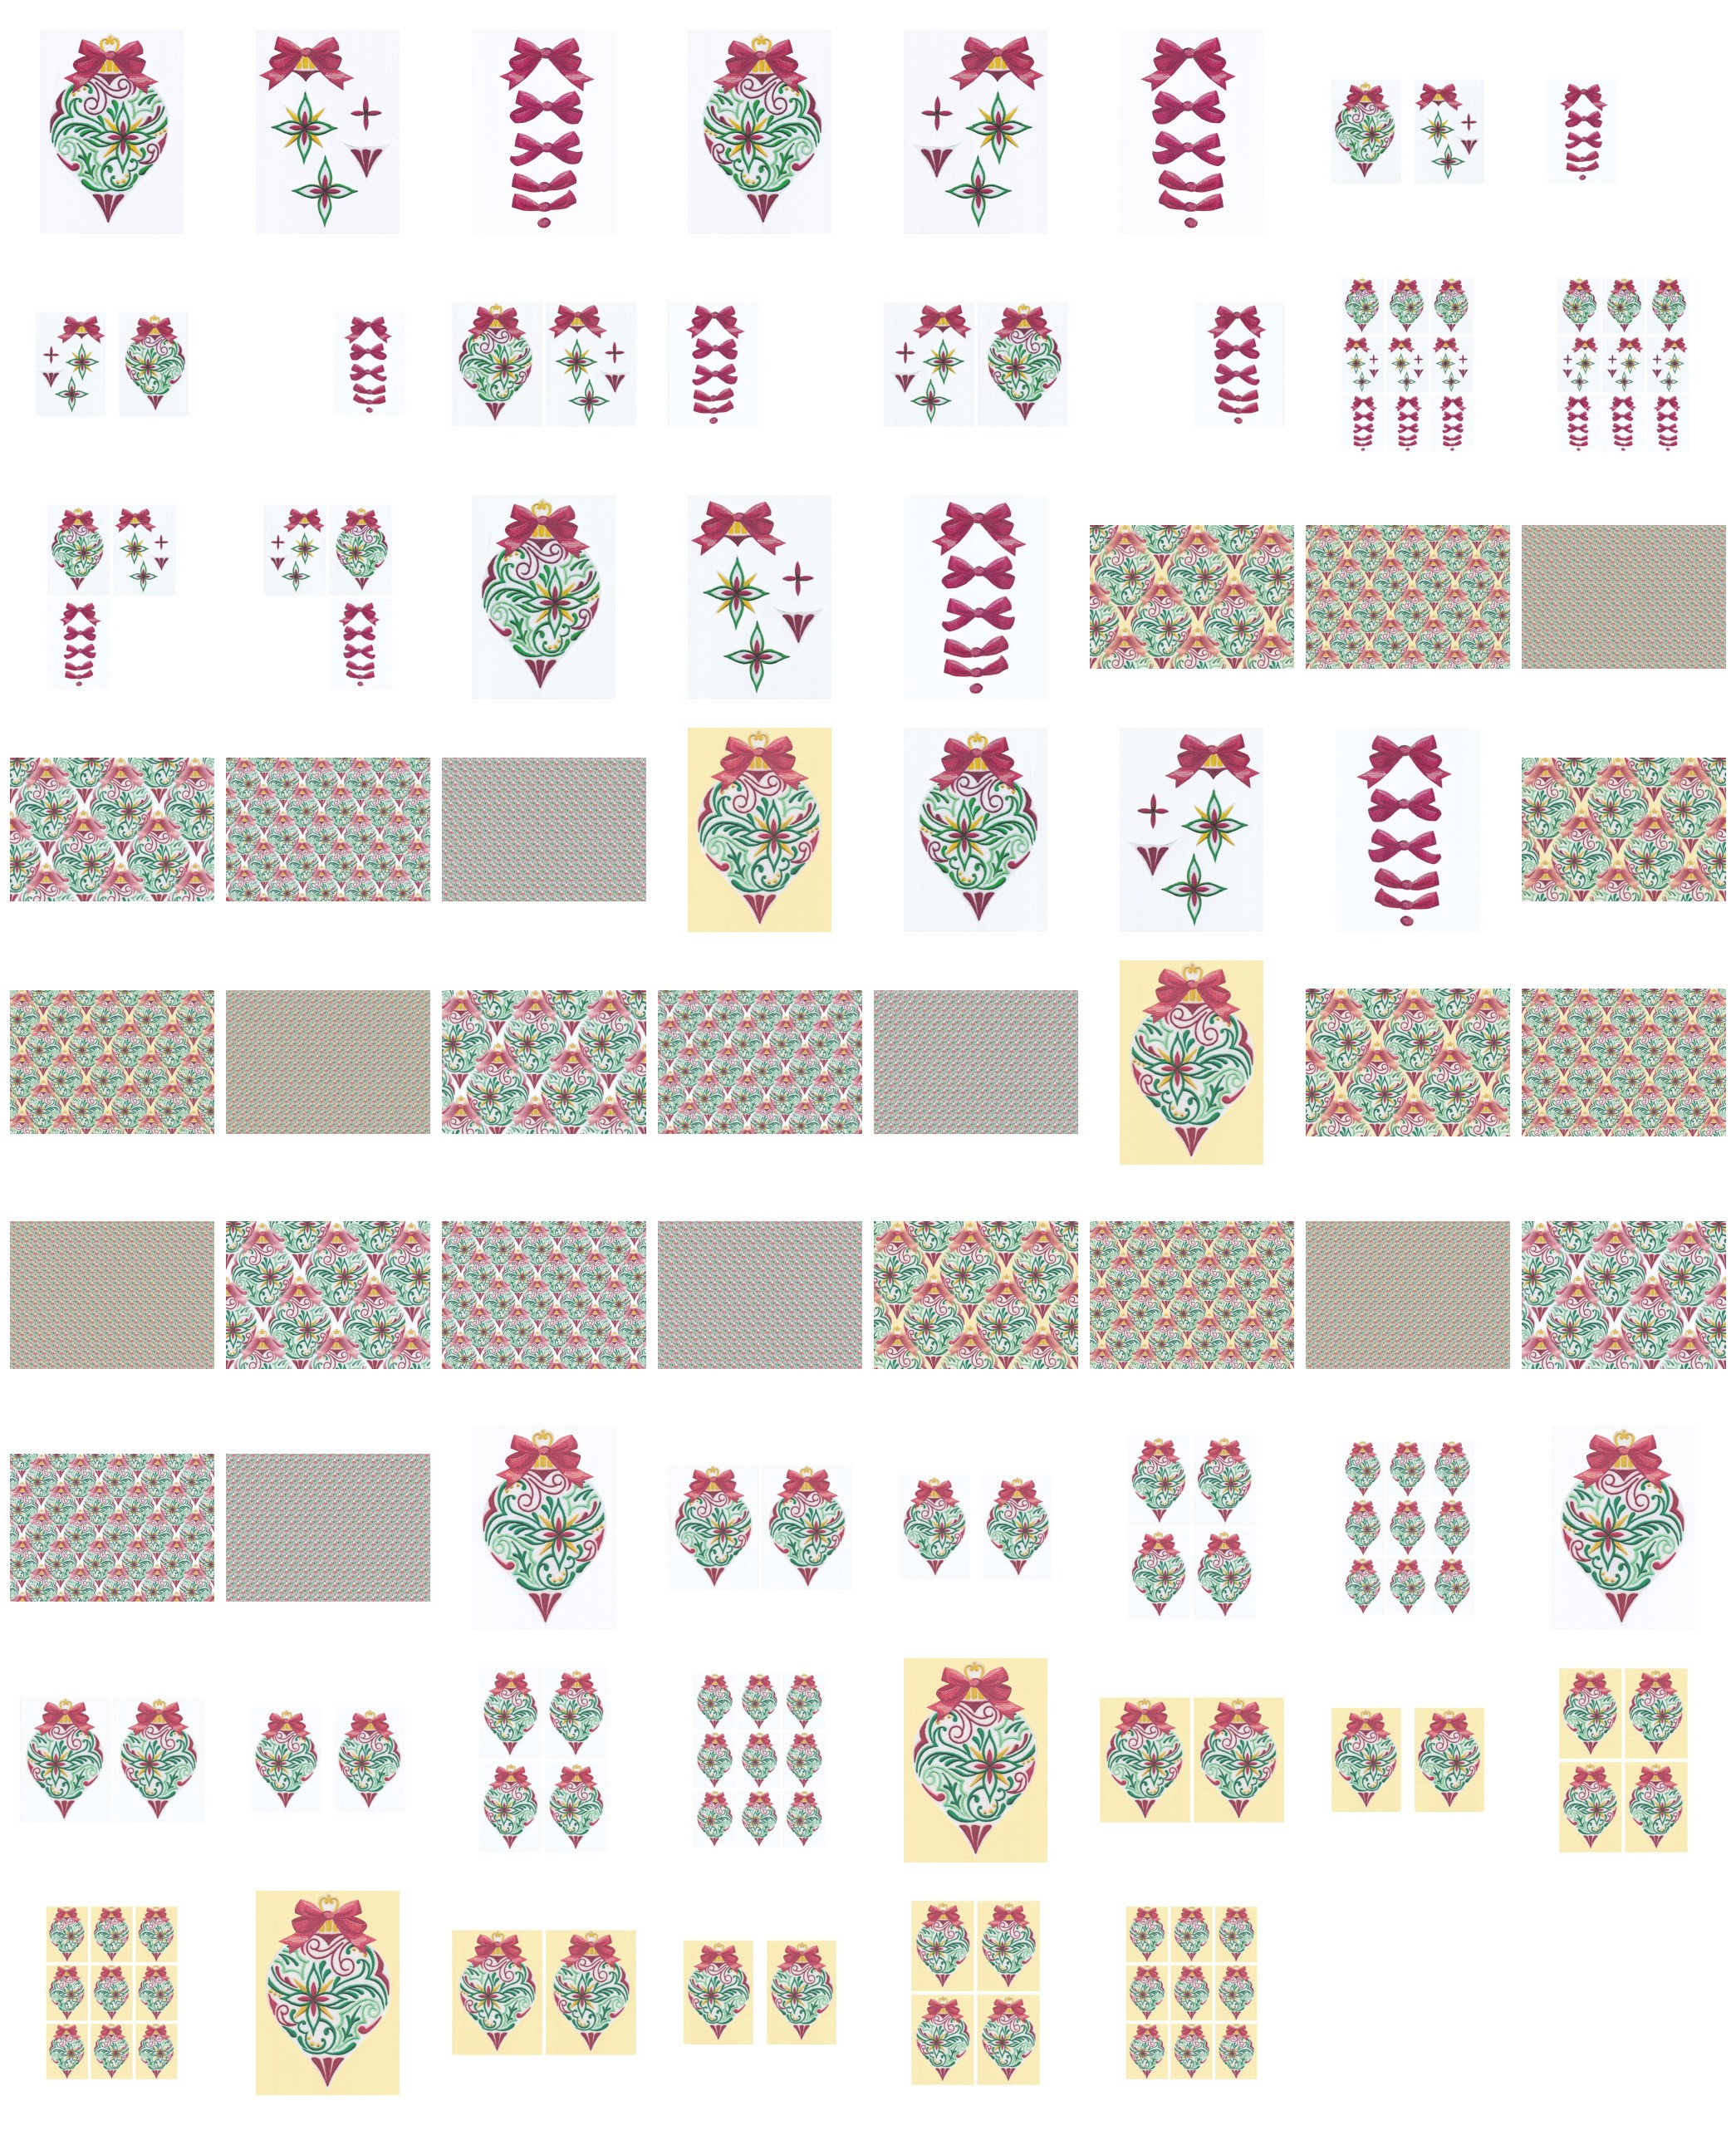 Christmas Fabric Effect Baubles Set 05- 70 Pages to Download